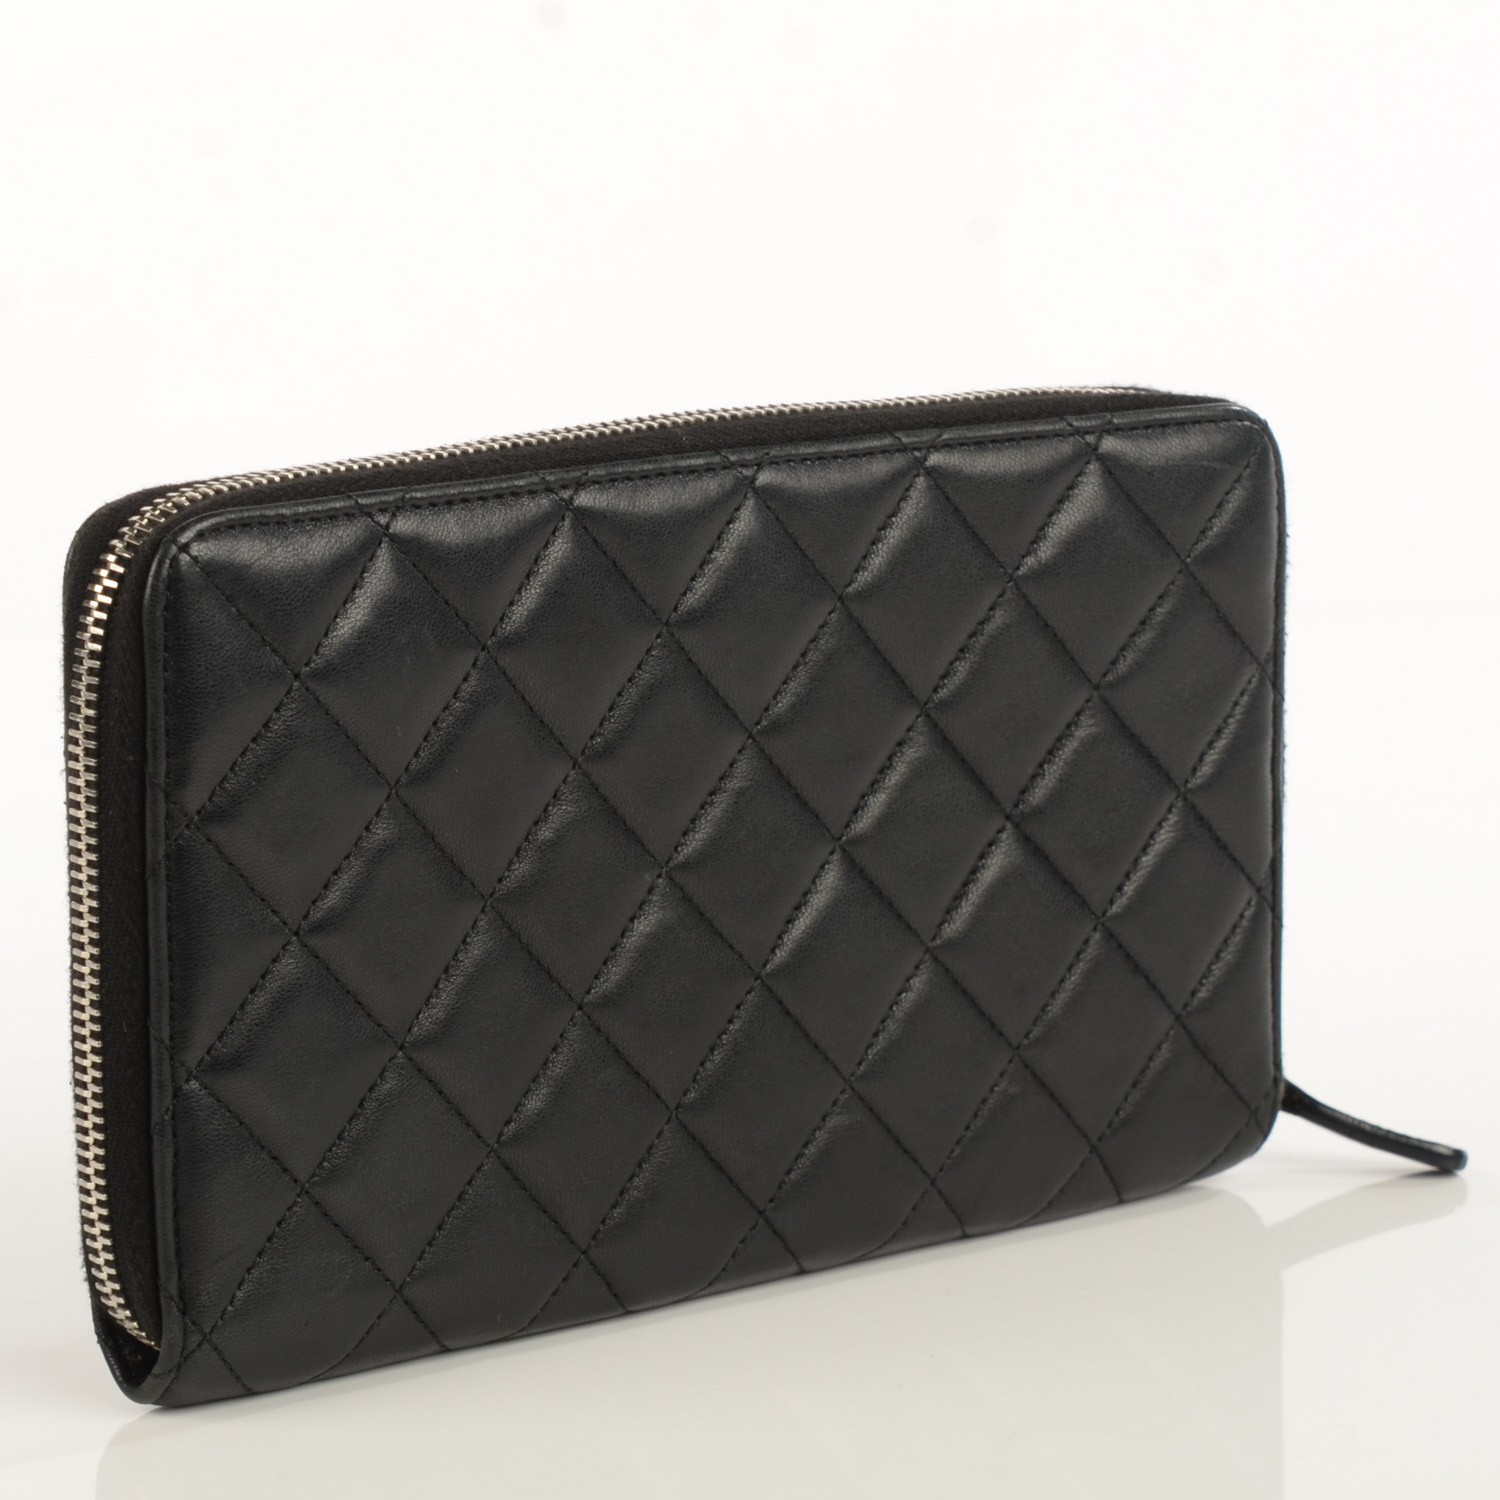 CHANEL Lambskin Quilted Large Zipped Wallet Black 113560